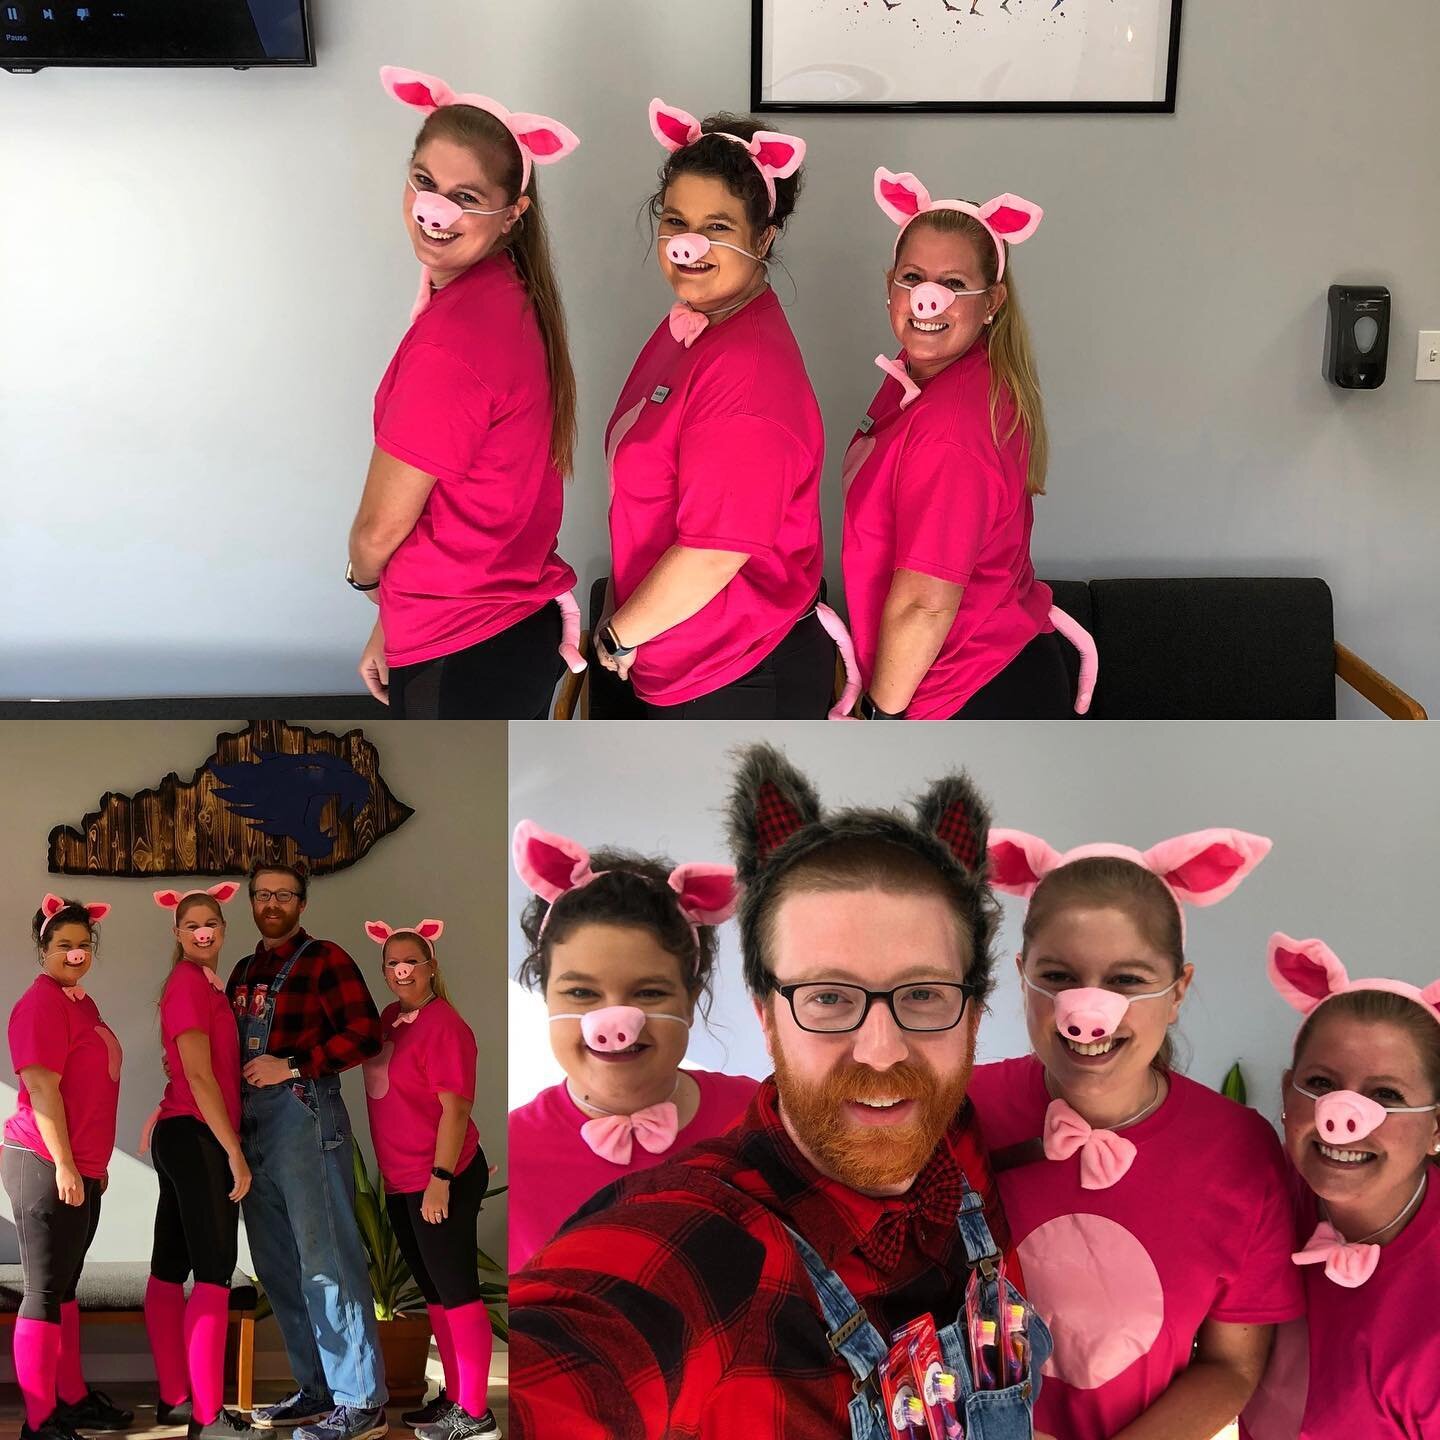 We like to have fun around here! Had such a good time handing out candy for the Lawrence County Public Library Toddler Story Hour!